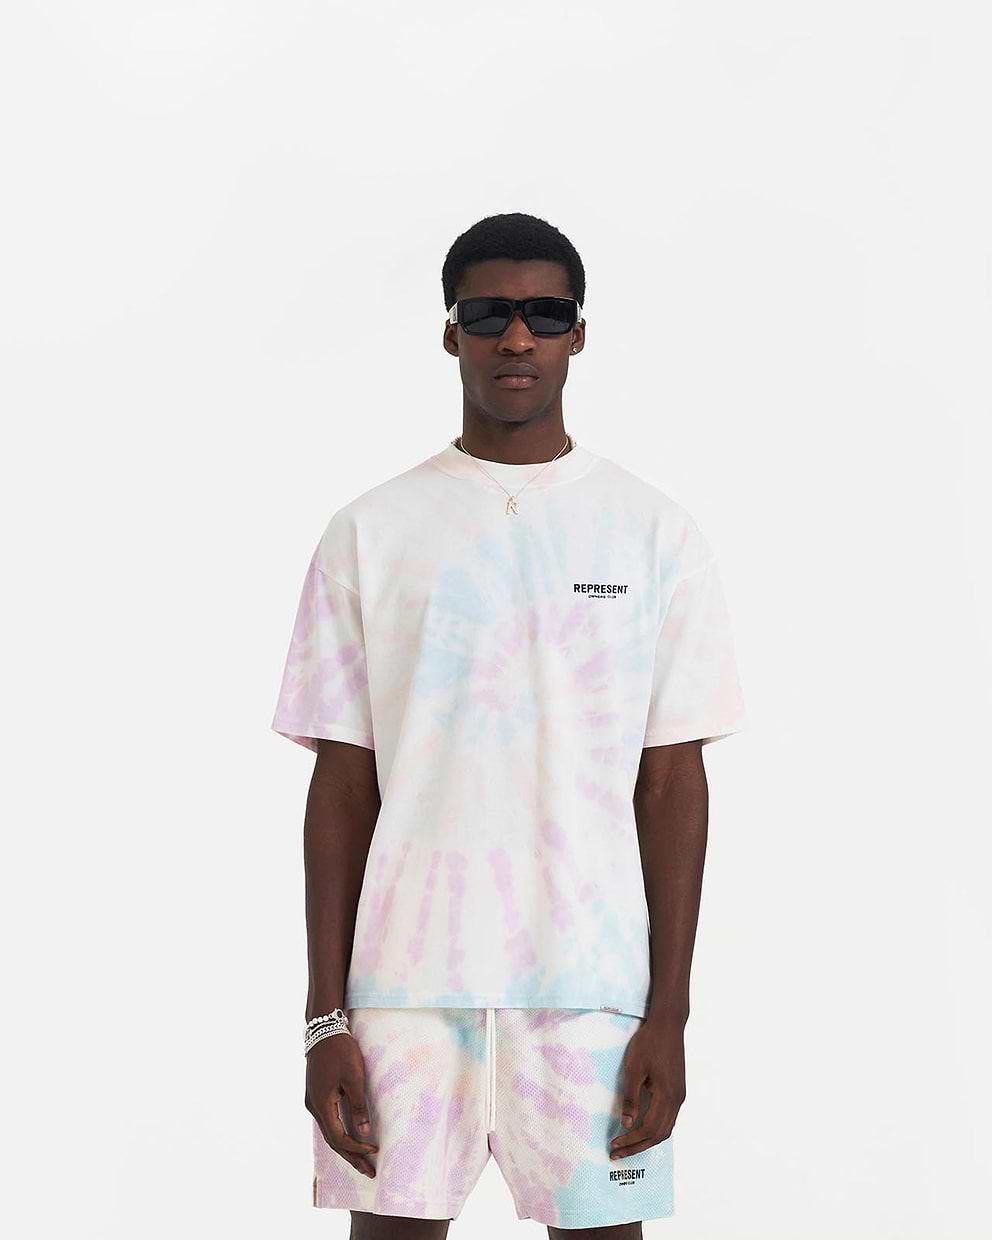 Represent Owners Club T-Shirt - Tie Dye